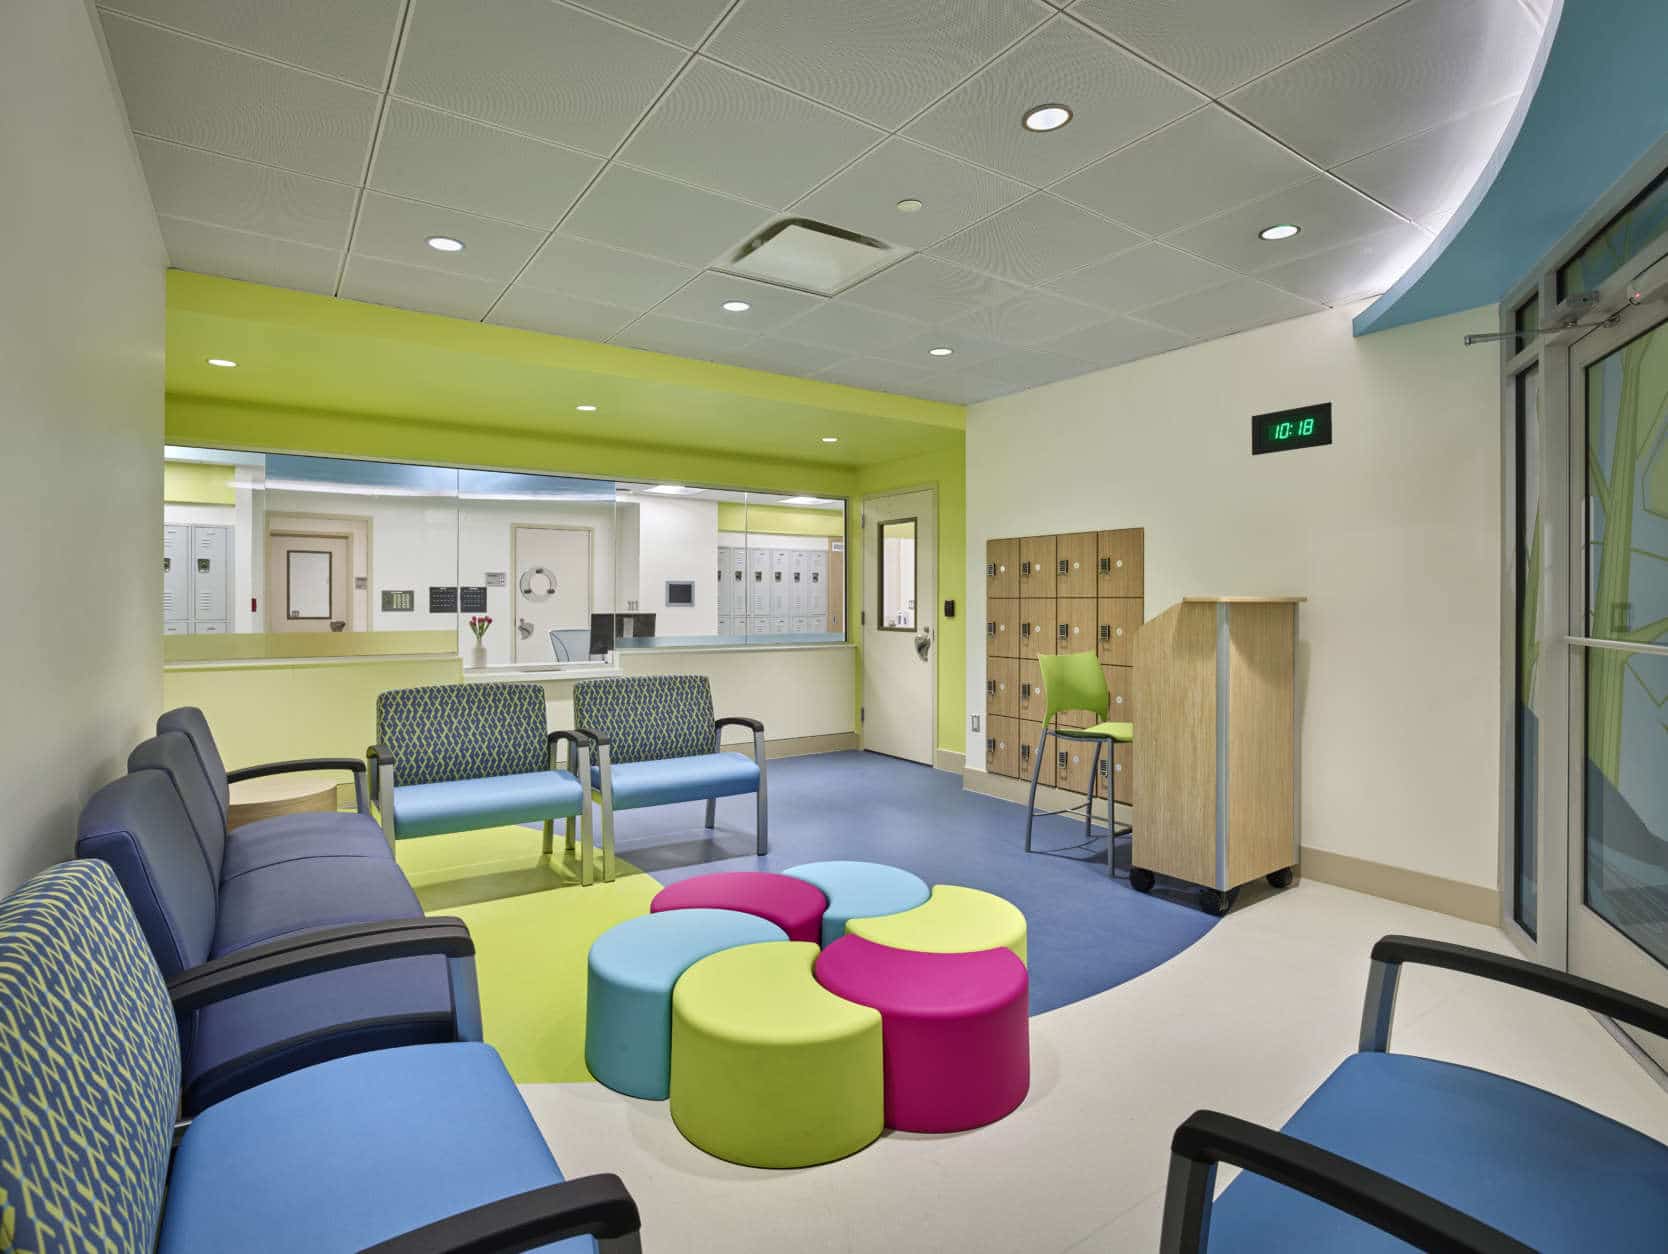 The Medical Director for Municipal and Regional Affairs at the Child Health Advocacy Institute at Children’s National, Dr. Lee Beers, said they've had the inpatient psychiatry unit for many years. But she believes the newly renovated unit will make it a better experience for children and families with a much more supportive and healing environment. (Courtesy Children's National Medical Center) 